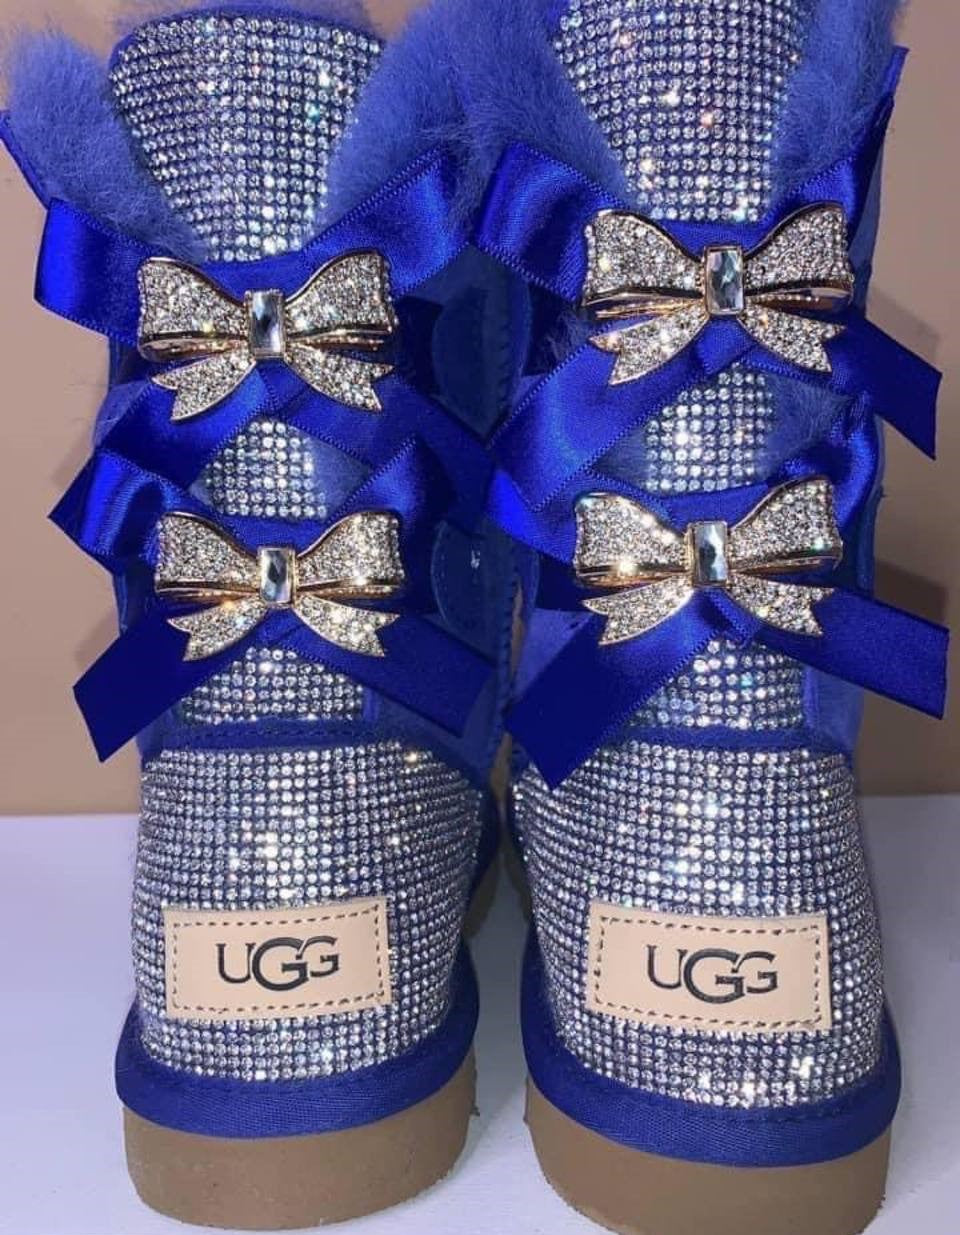 Rhinestone Ugg Boots - 10 Colors Available | See Sizing Chart